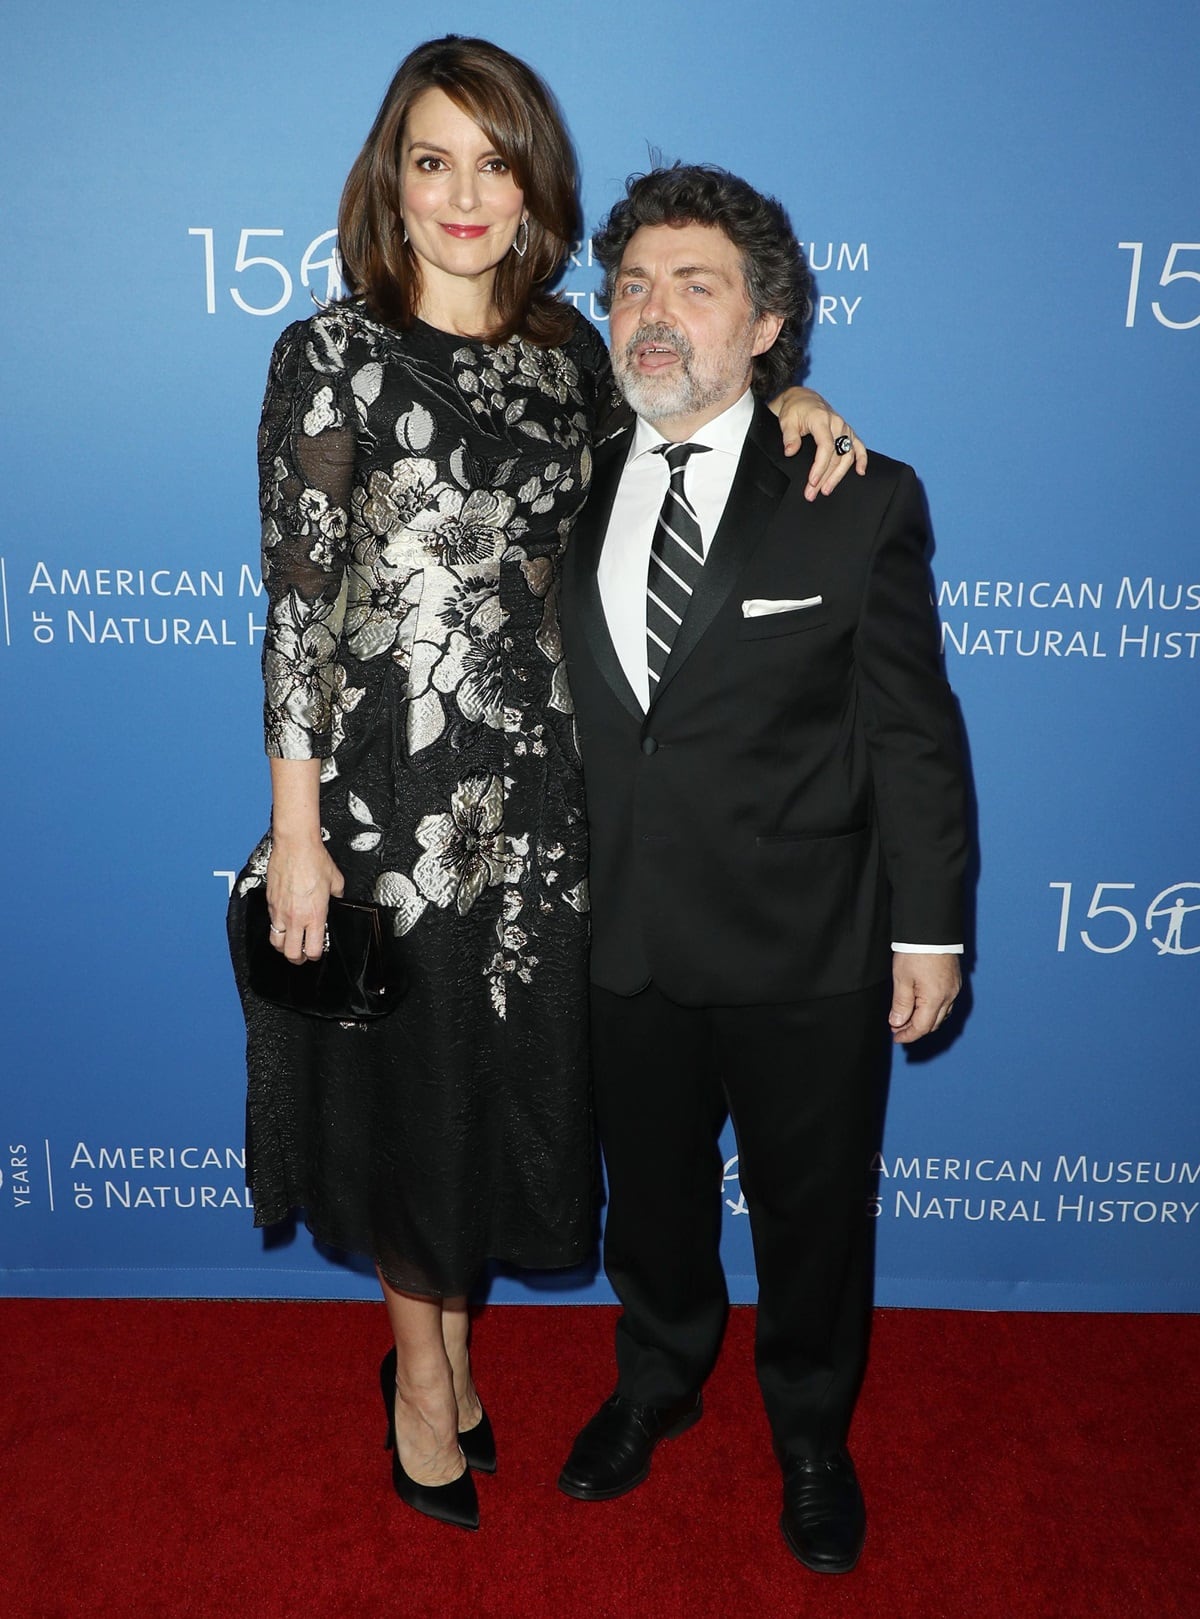 Tina Fey, at 5 feet 4 ½ inches, is taller than her 5 feet 2 inches tall husband, Jeff Richmond